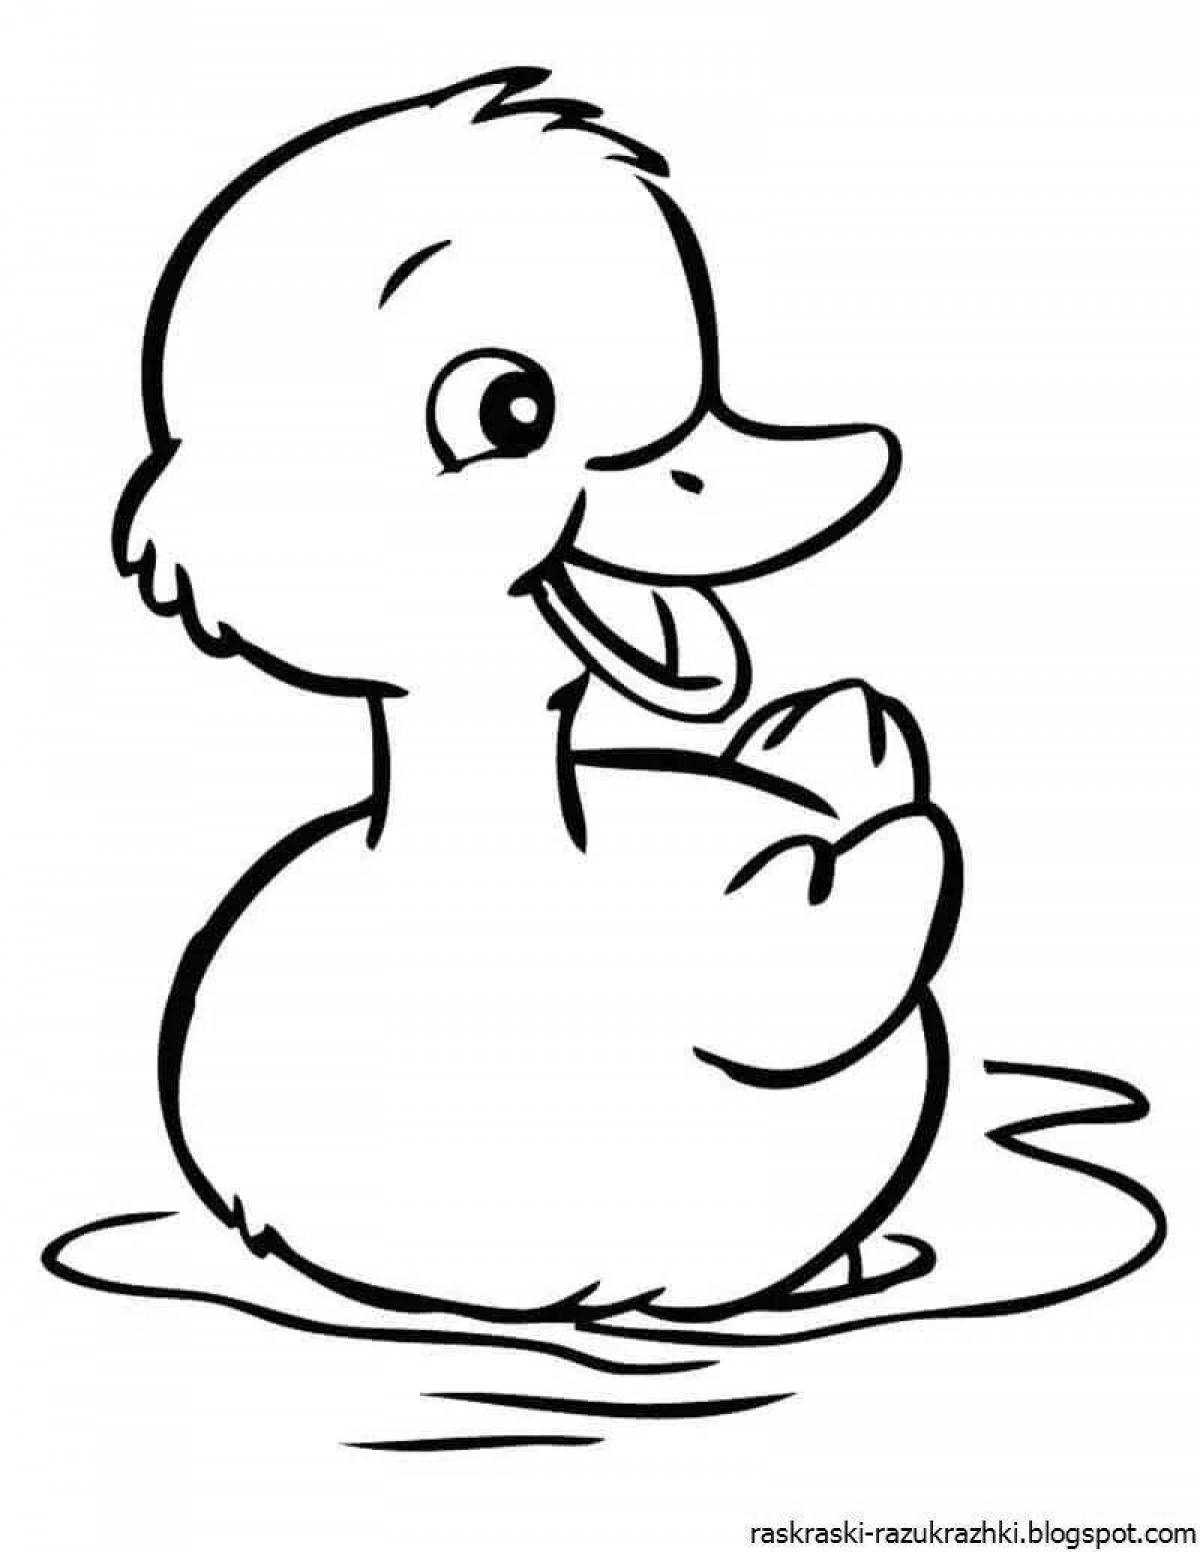 Coloring book happy duck for kids